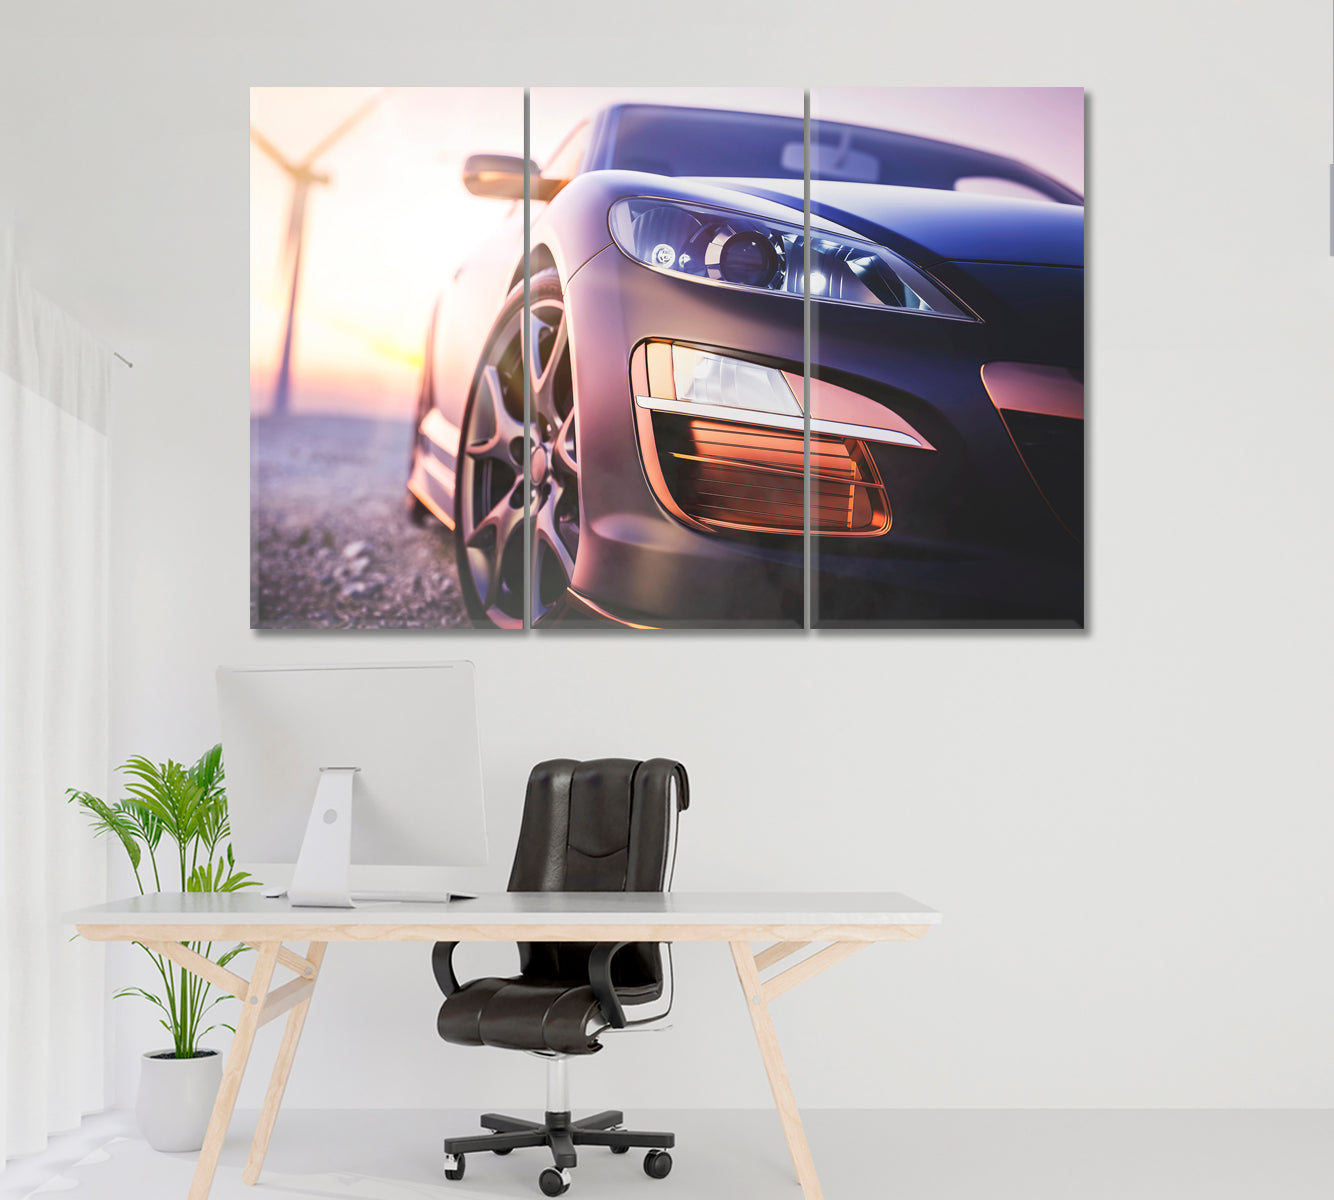 Sports Car and Wind Turbine Canvas Print ArtLexy 3 Panels 36"x24" inches 